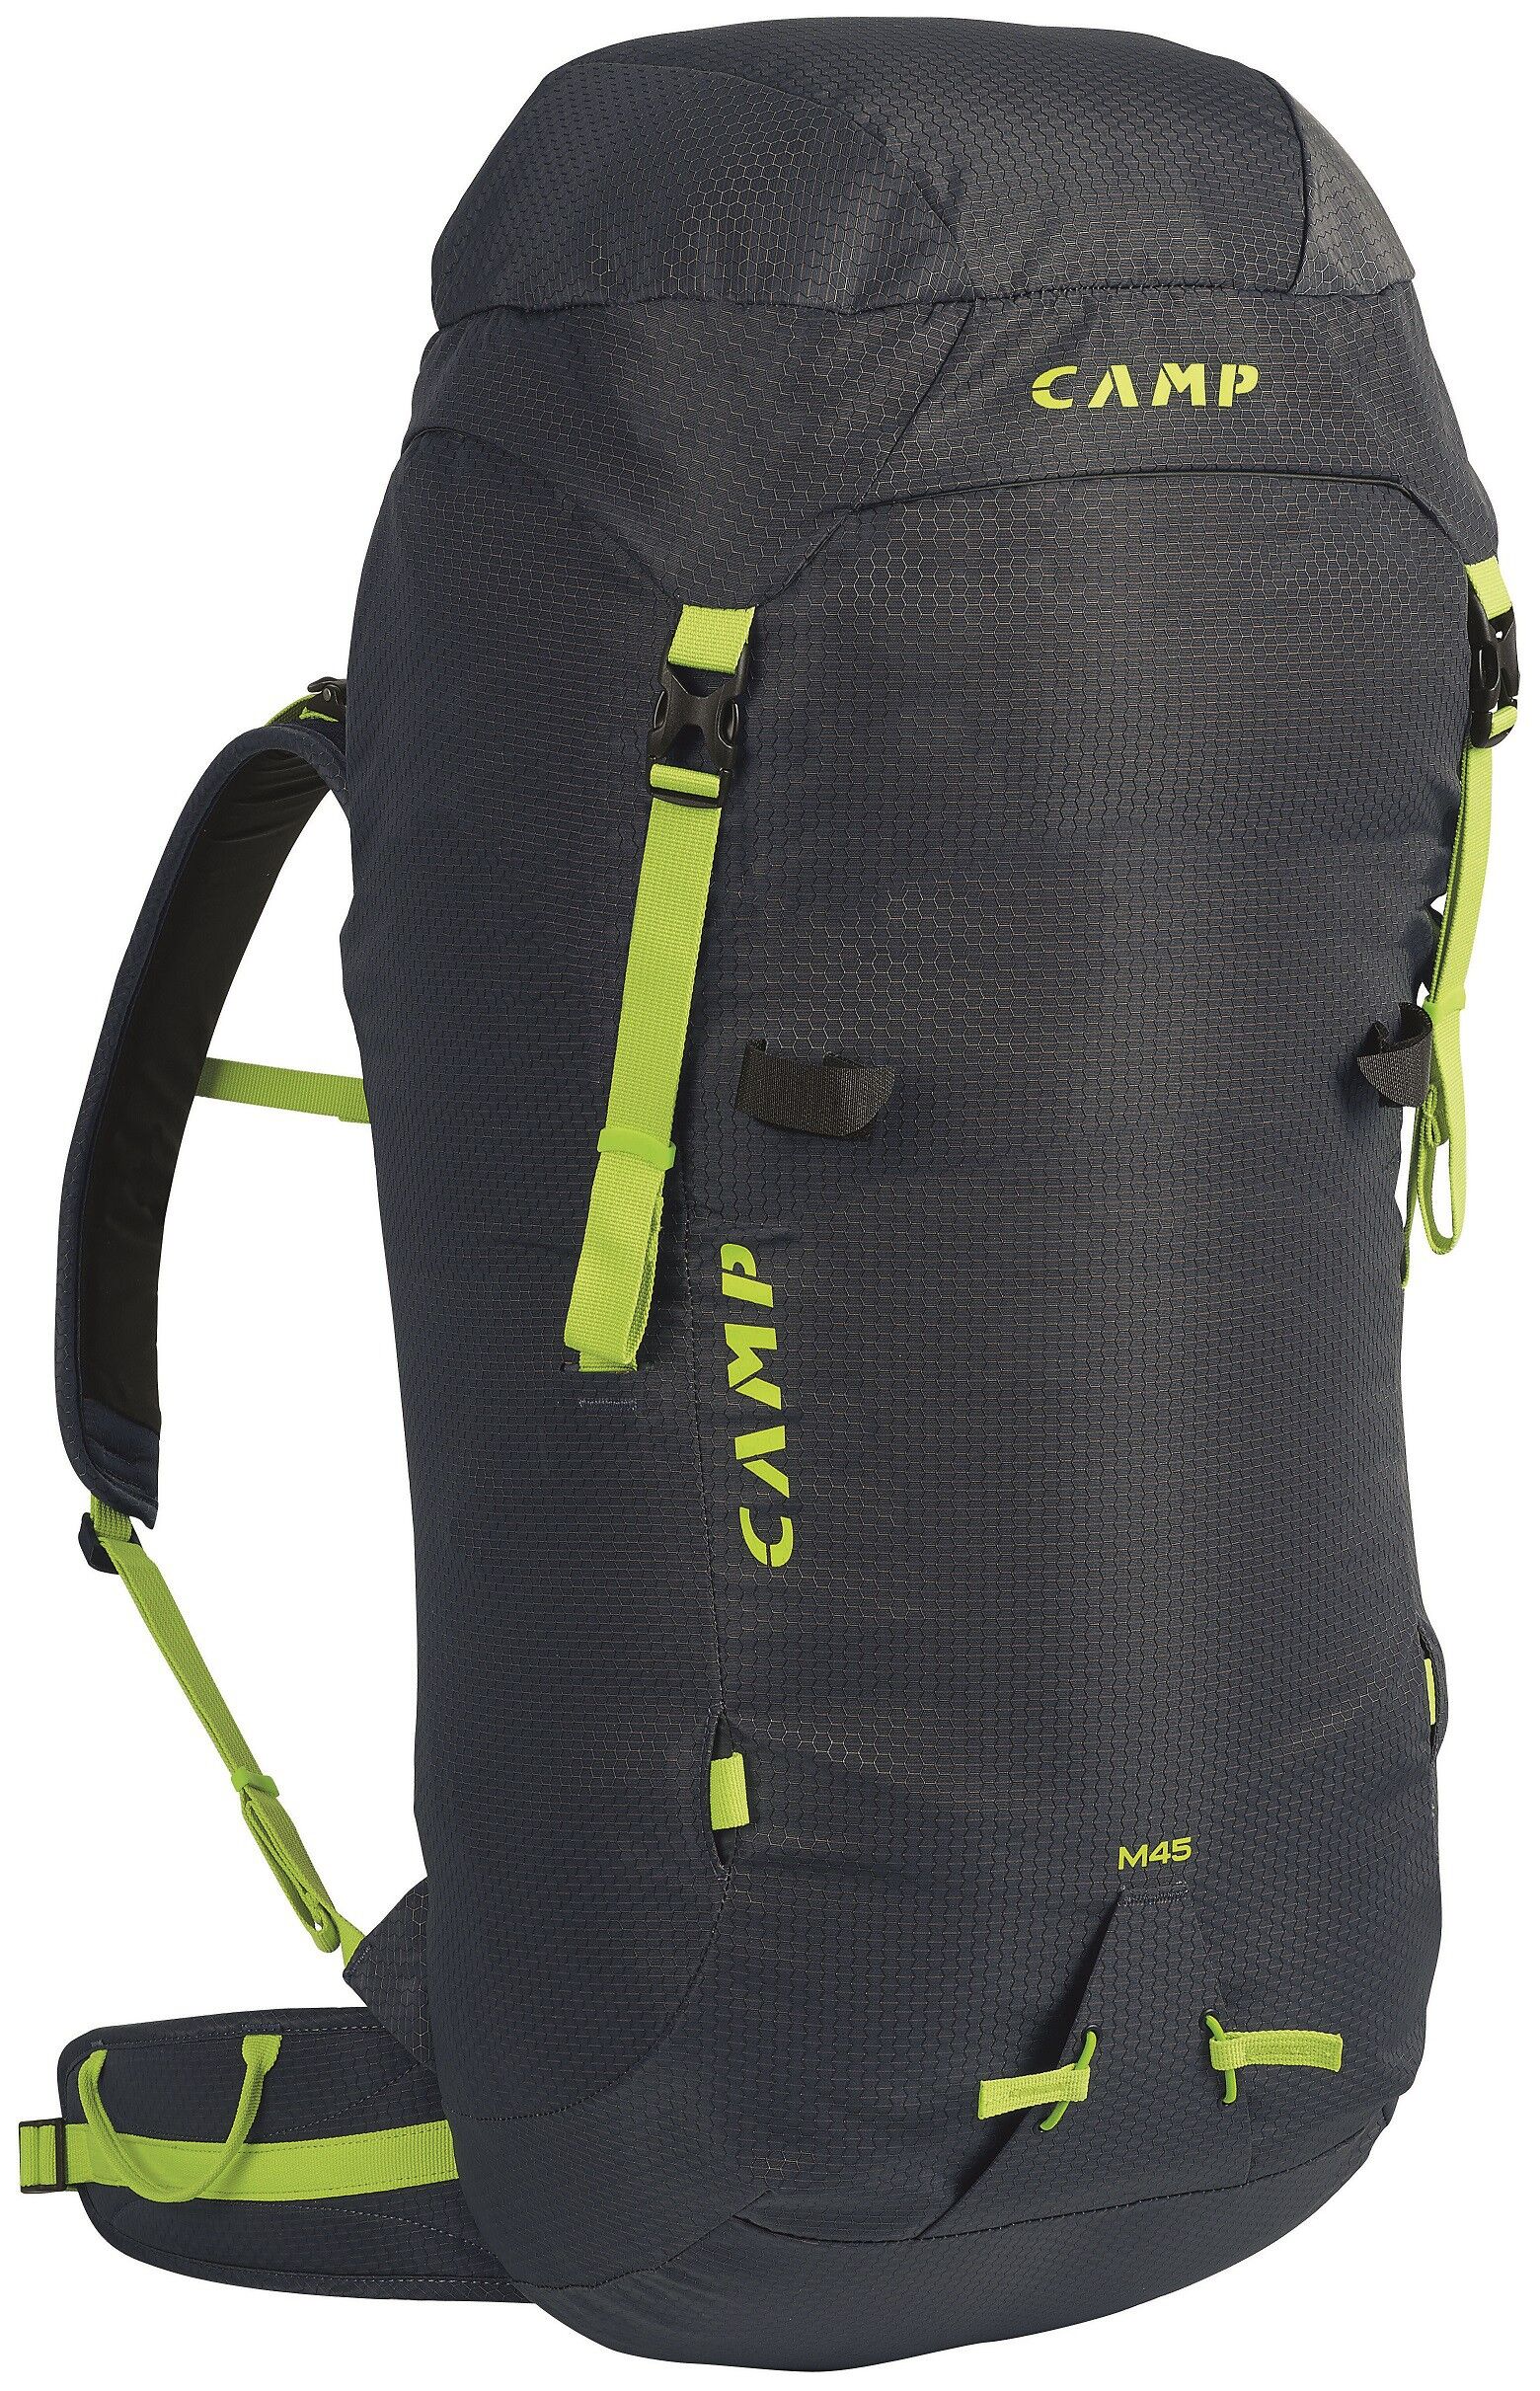 Camp M 45 - Mountaineering backpack